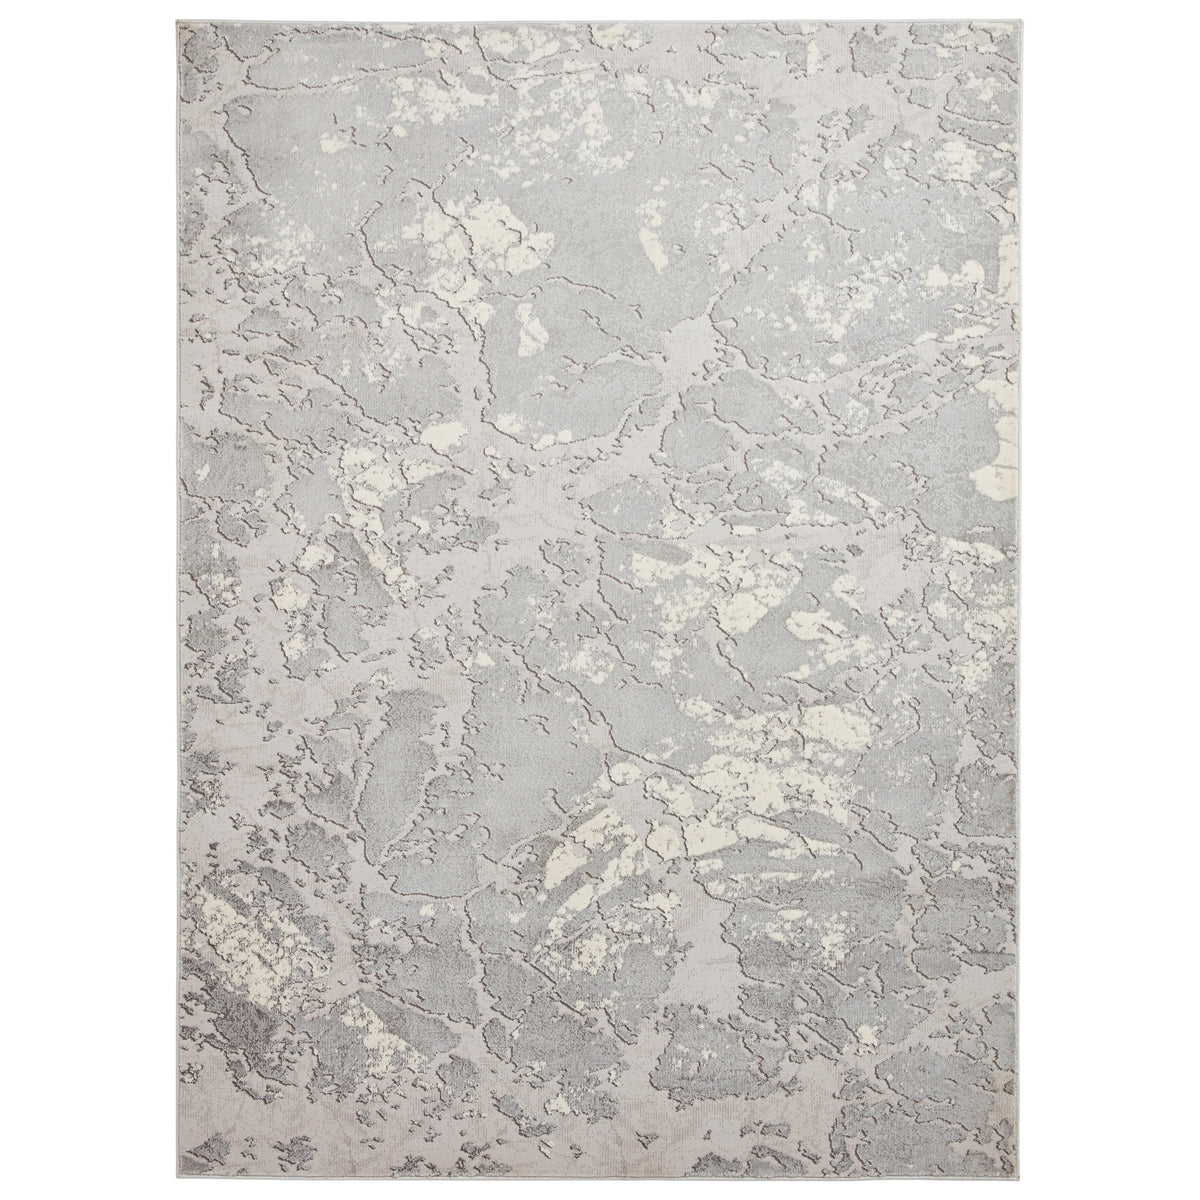 Aldrin Grey Ivory Marble Effect Rug from Roseland Furniture